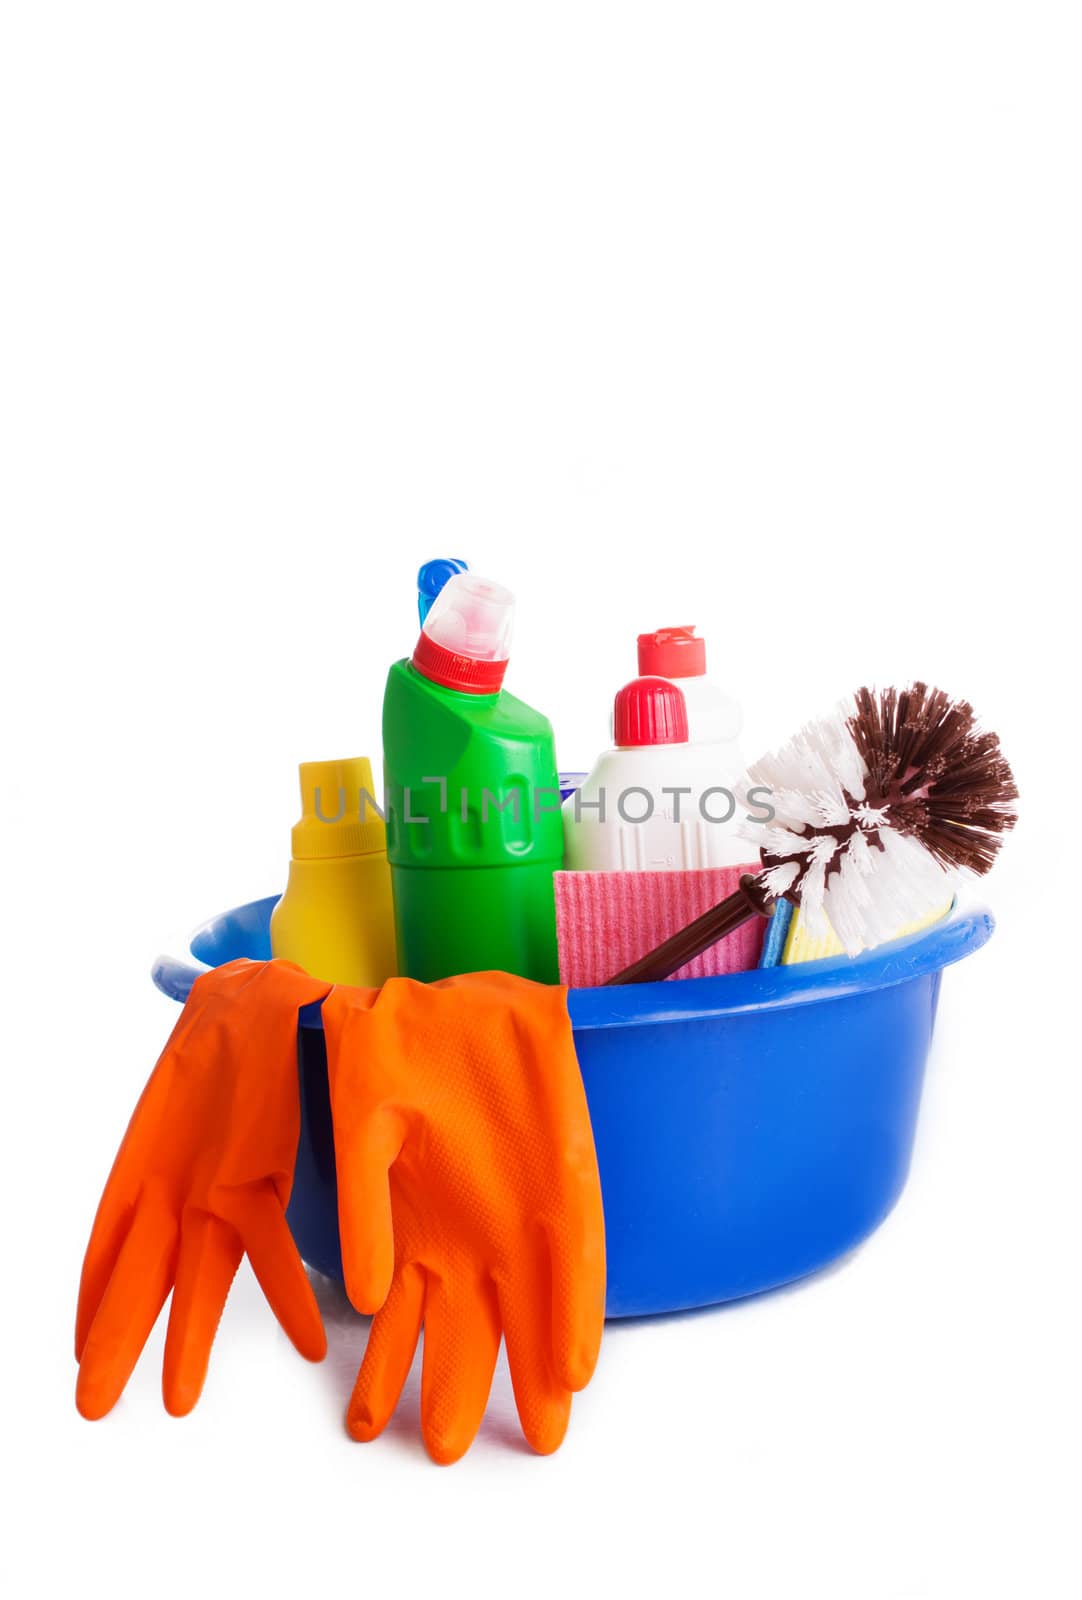 Set of cleaning products and tools by Angel_a